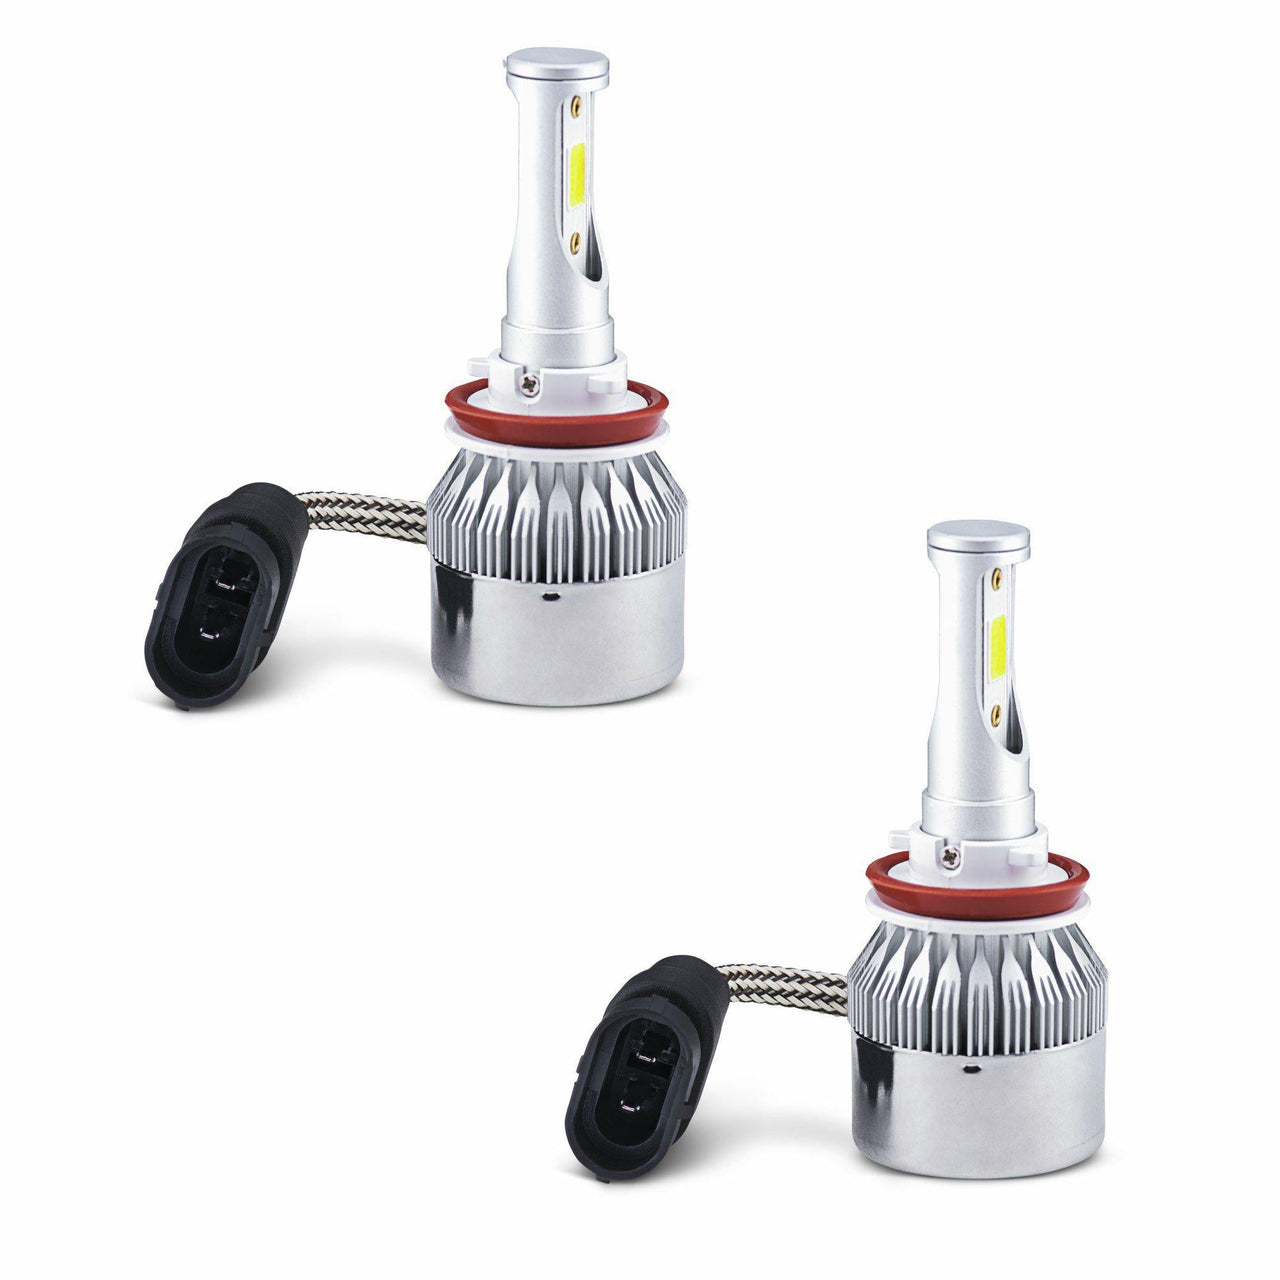 9045 LED Headlight Conversion Kit also known as H10 9145 9140 9040